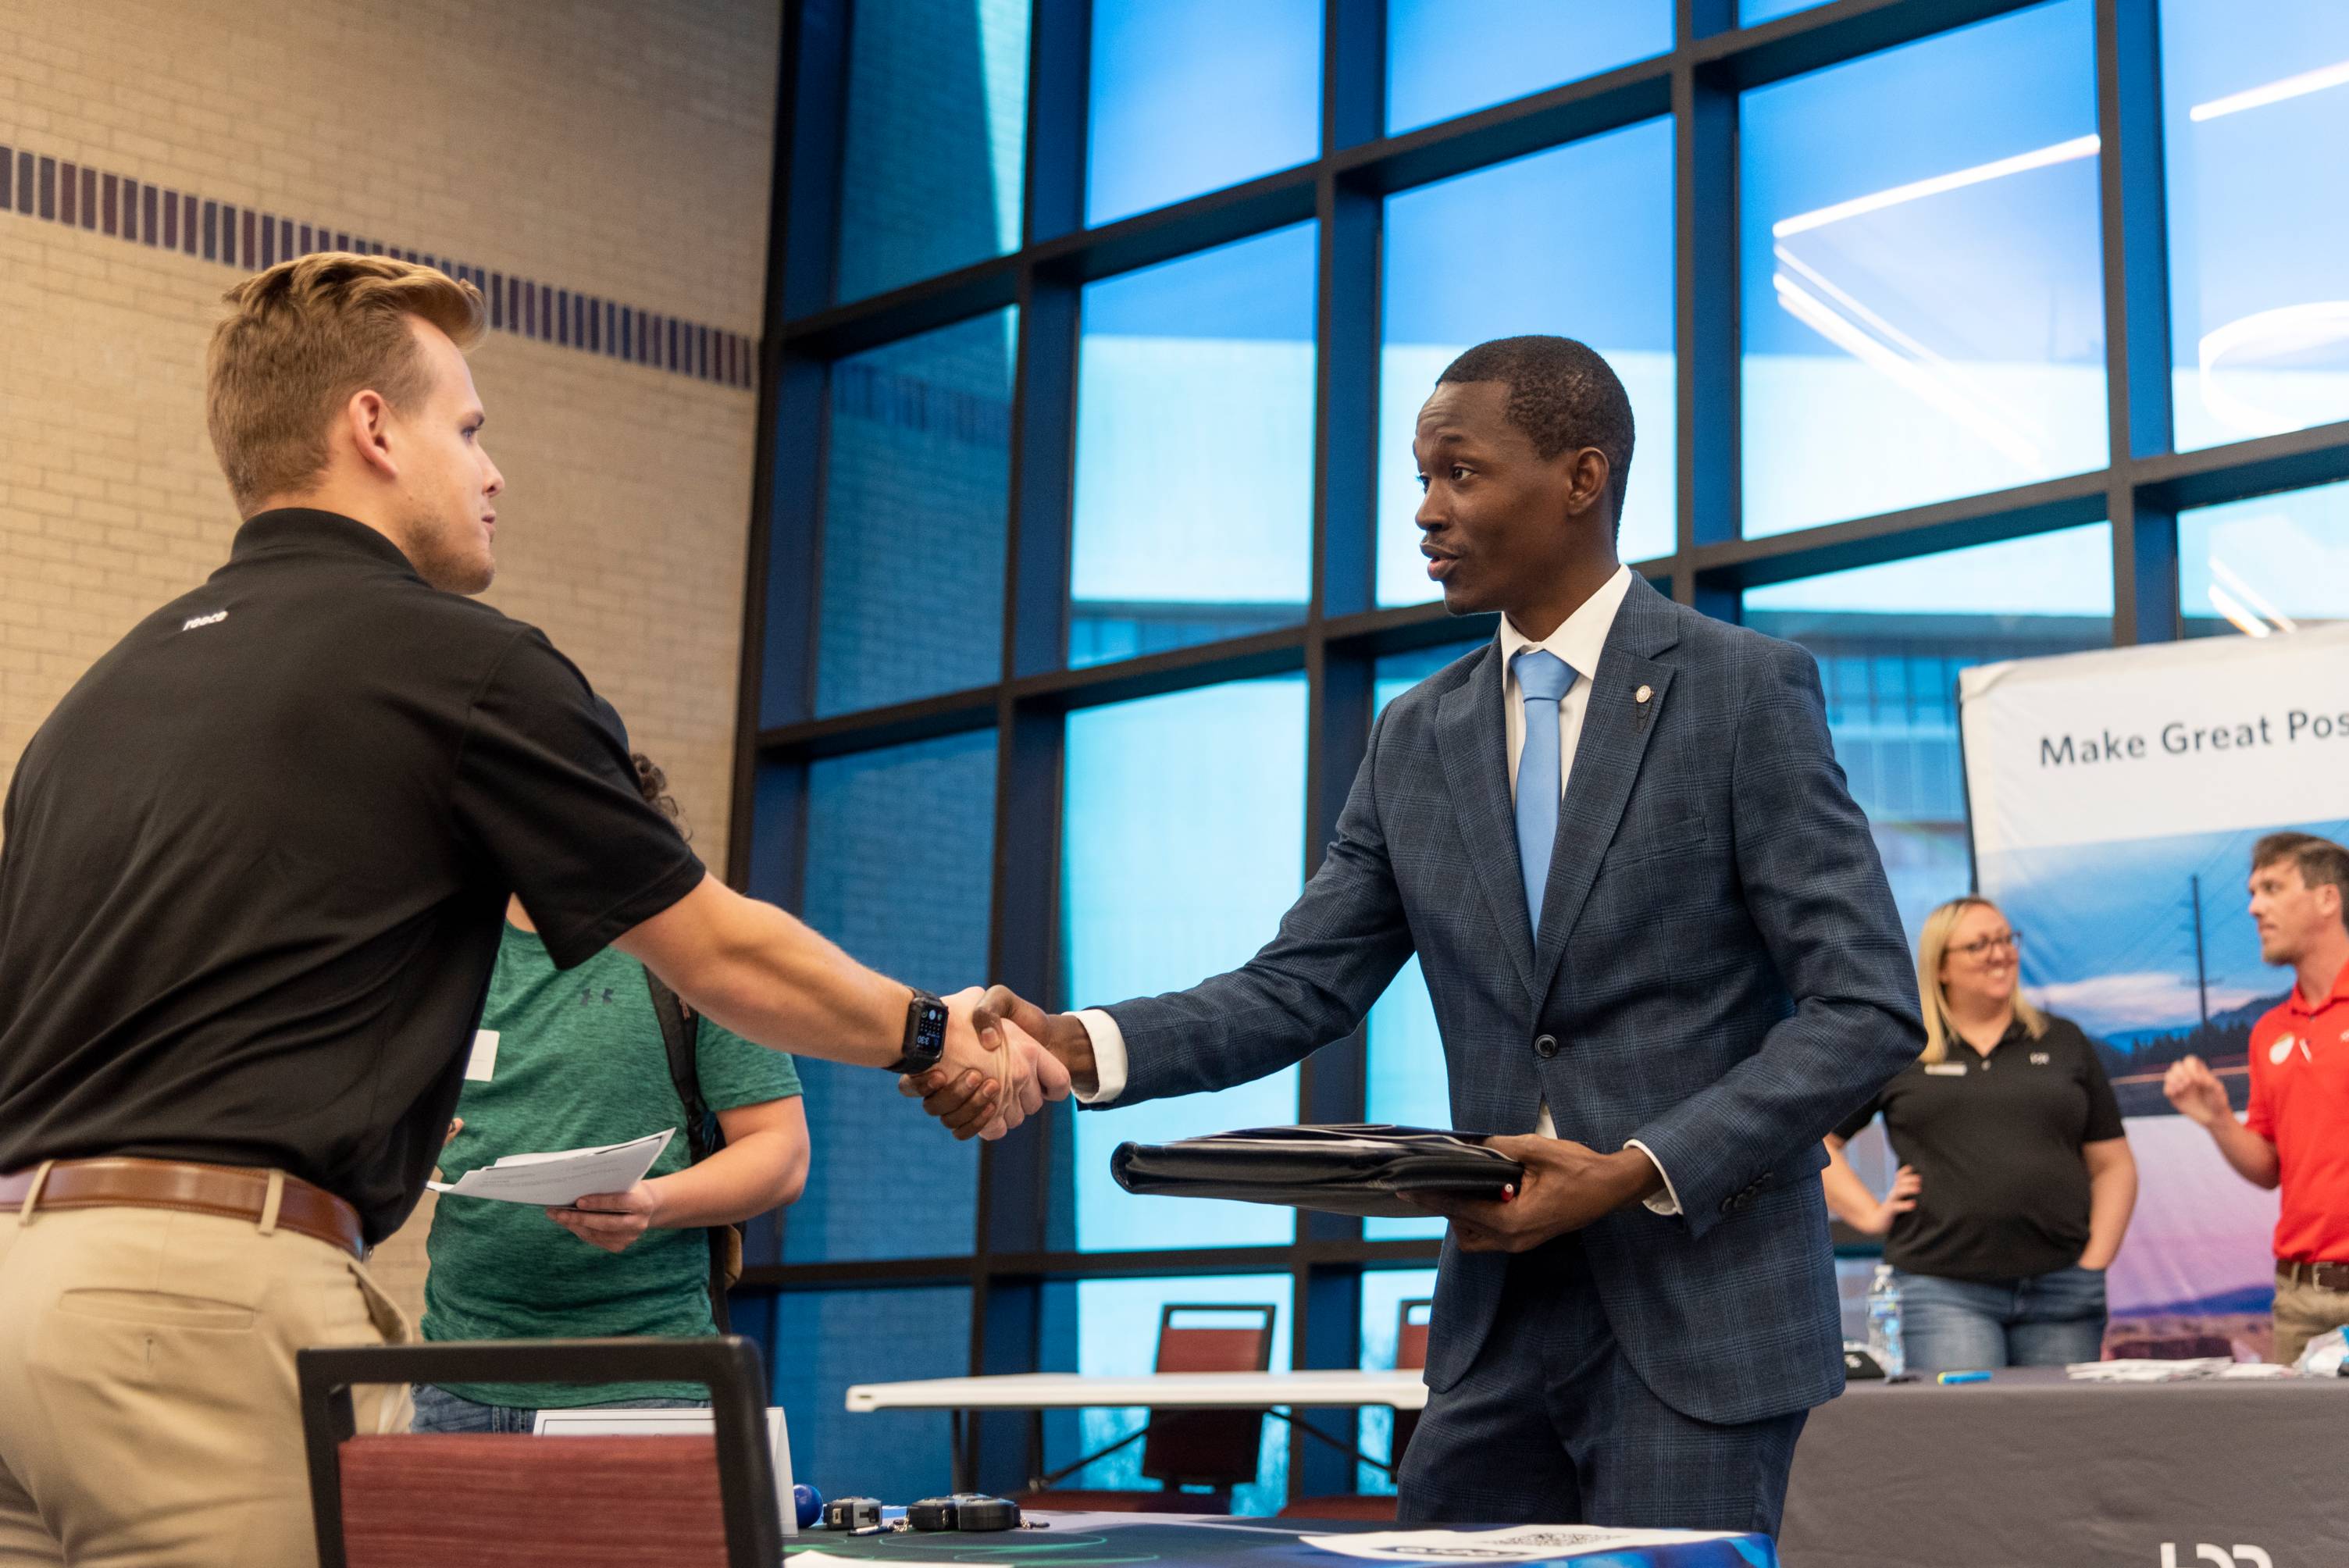 Student dressed sharply in a suit shakes hands with a recruiter at a Texas State Career fair